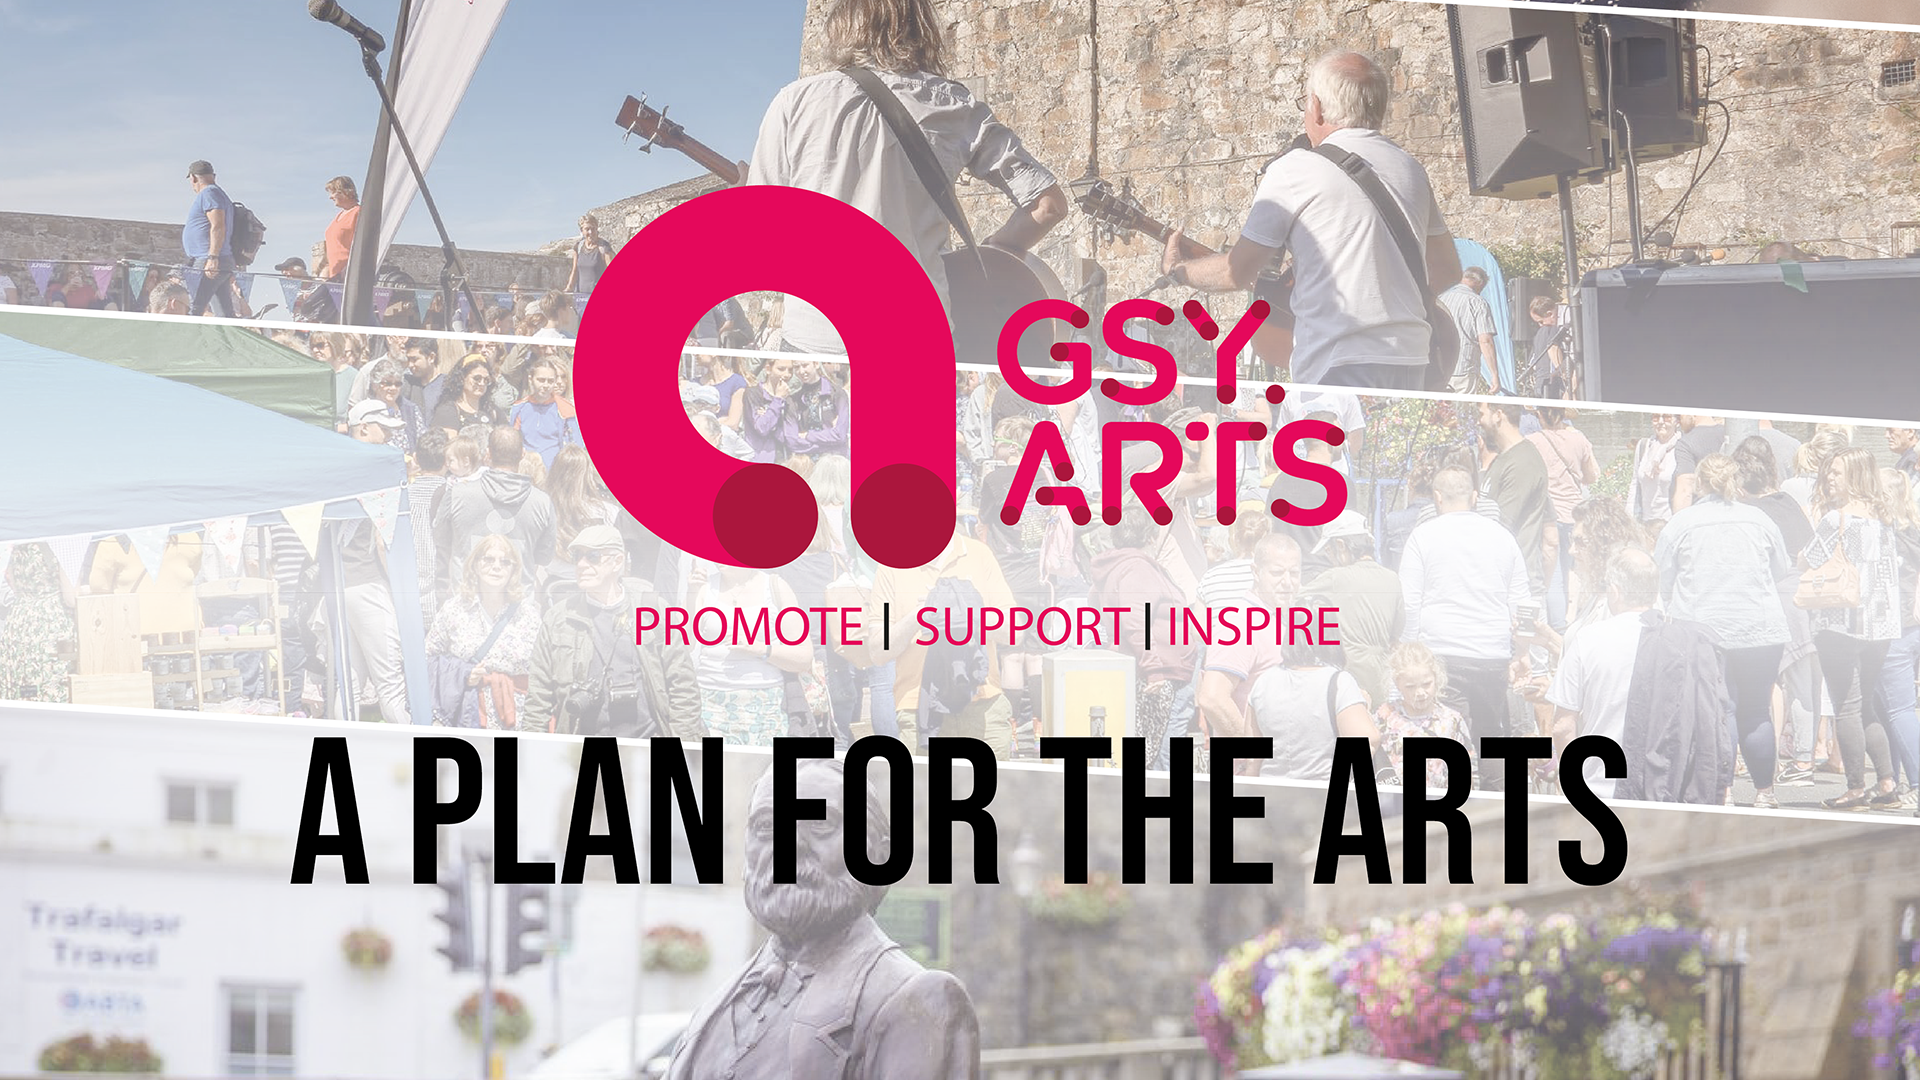 GUERNSEY ARTS PUBLISHES ITS PLAN FOR THE ARTS